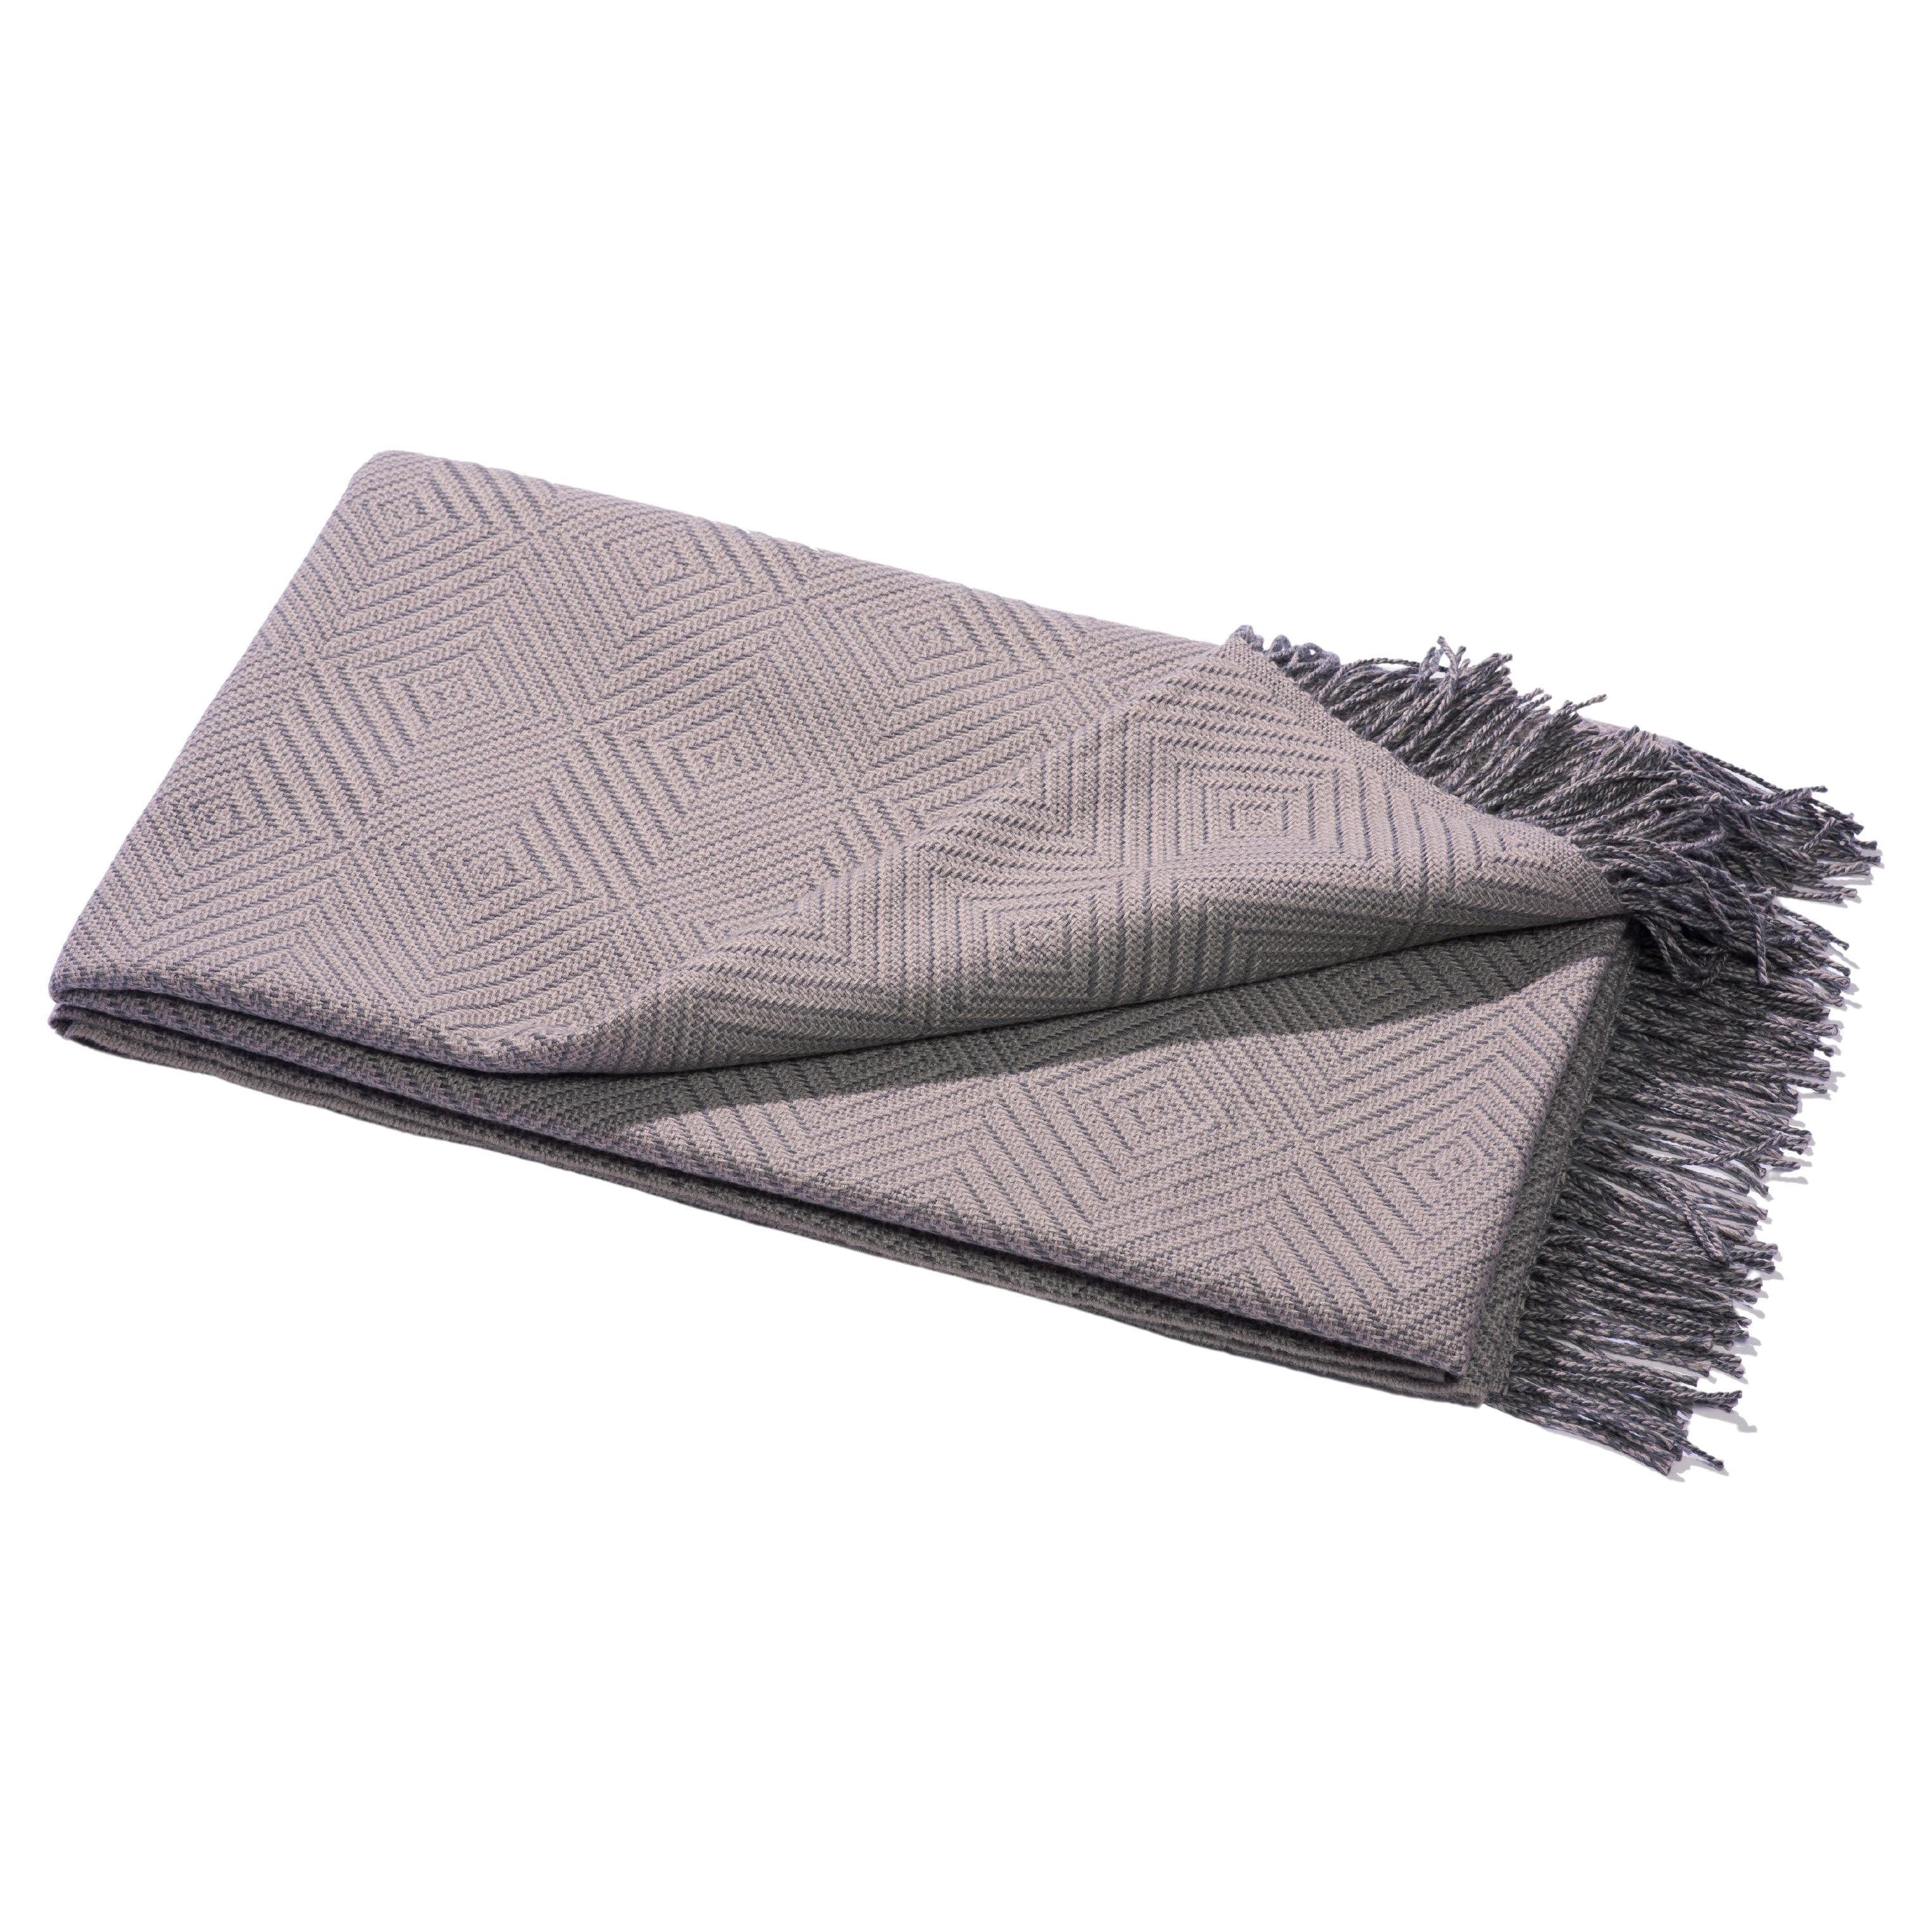 Bed Throw Woven of Extra Fine Merino in Mauve by Catharina Mende